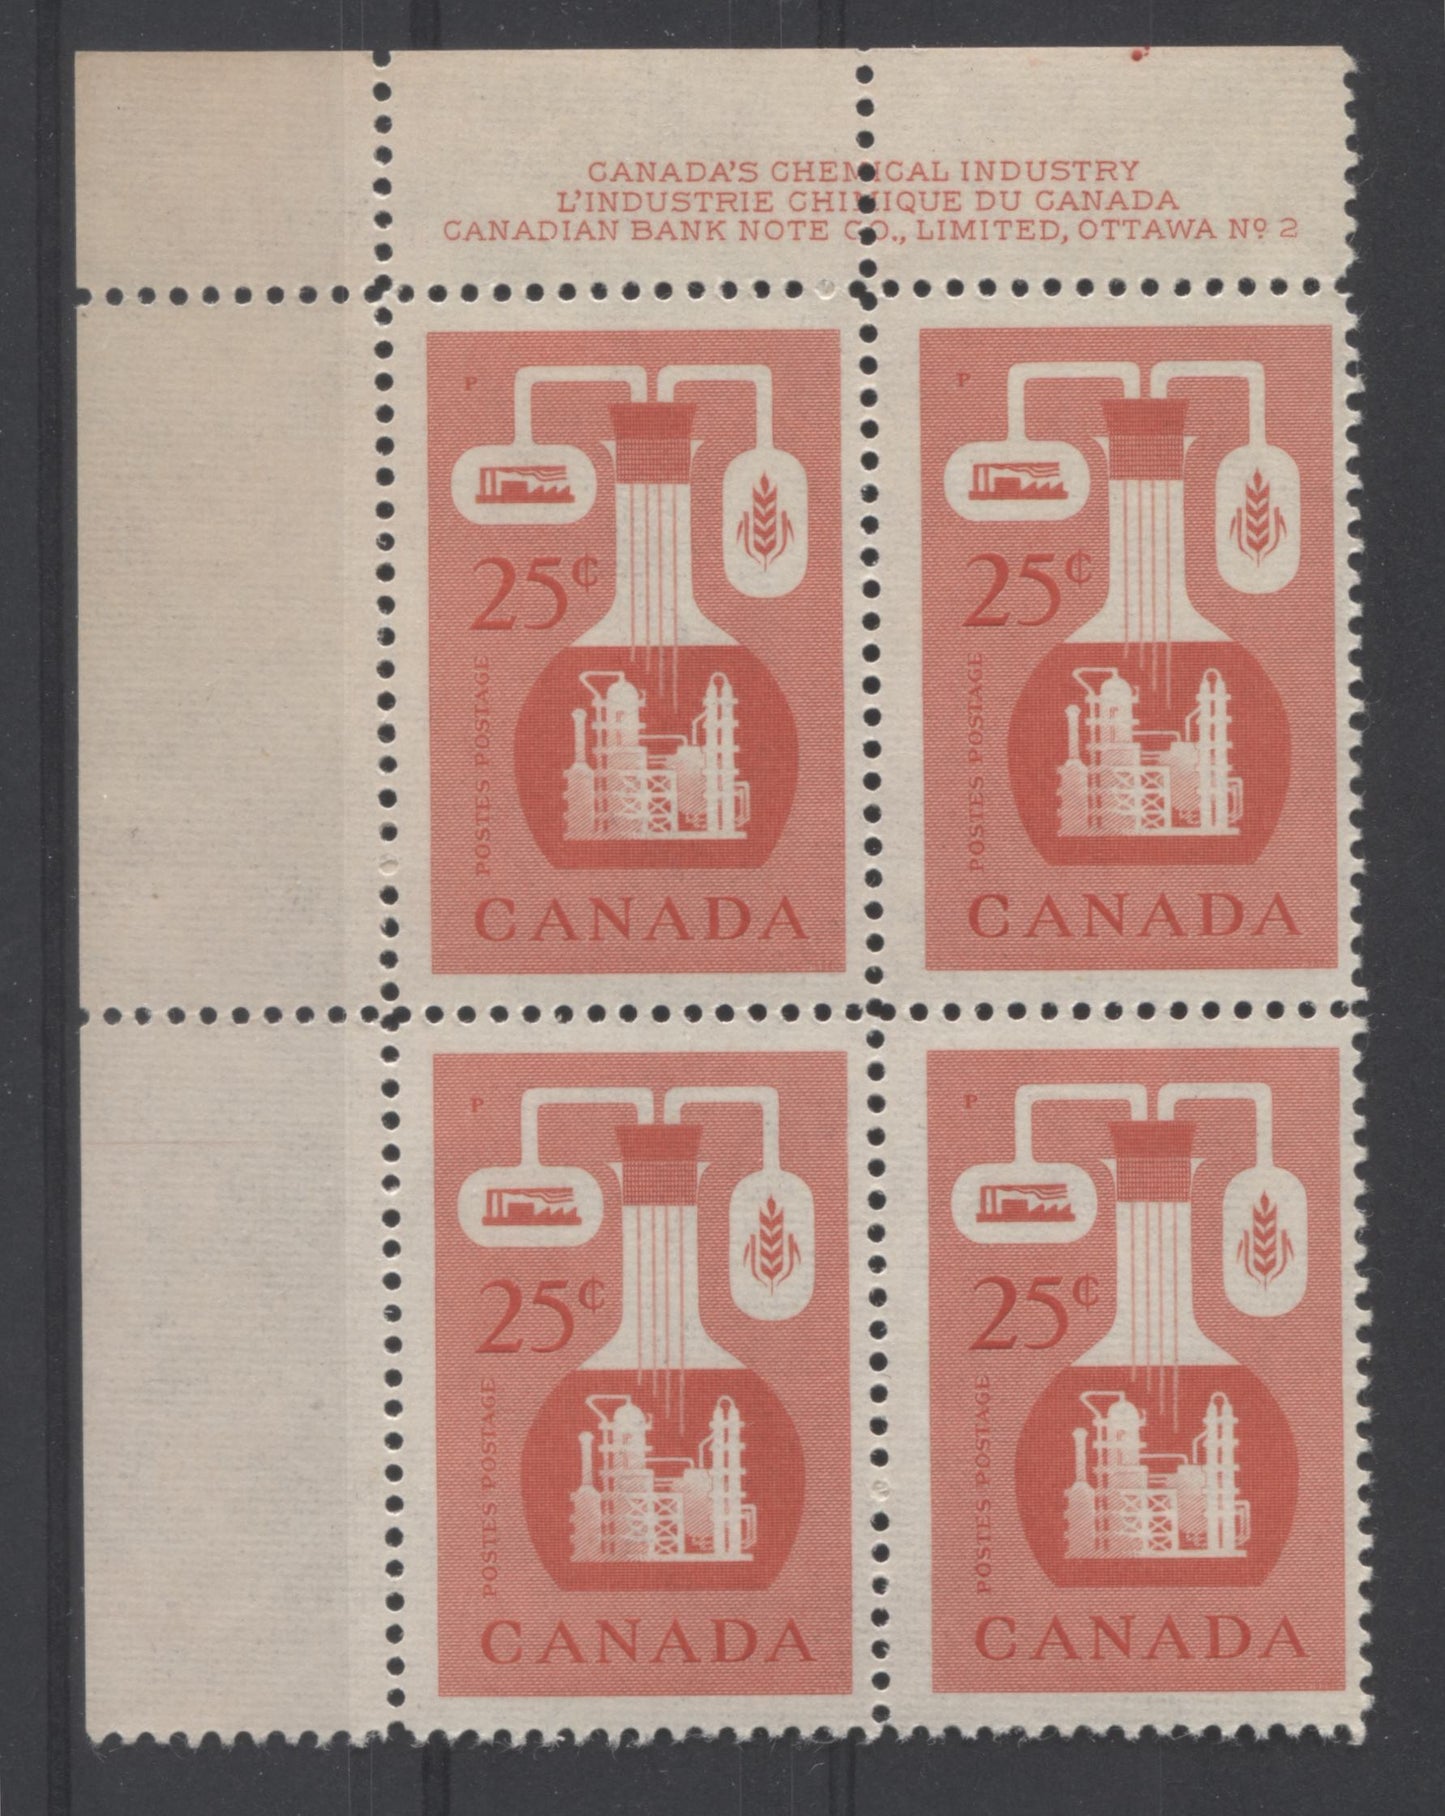 Canada #363 25c Light Vermilion Chemical Industry, 1954-67 Wilding and Cameo Issue, a FNH Upper Left Plate 2 Block on Dull Fluorescent Greyish White Ribbed Paper, Perf. 11.95 x 12